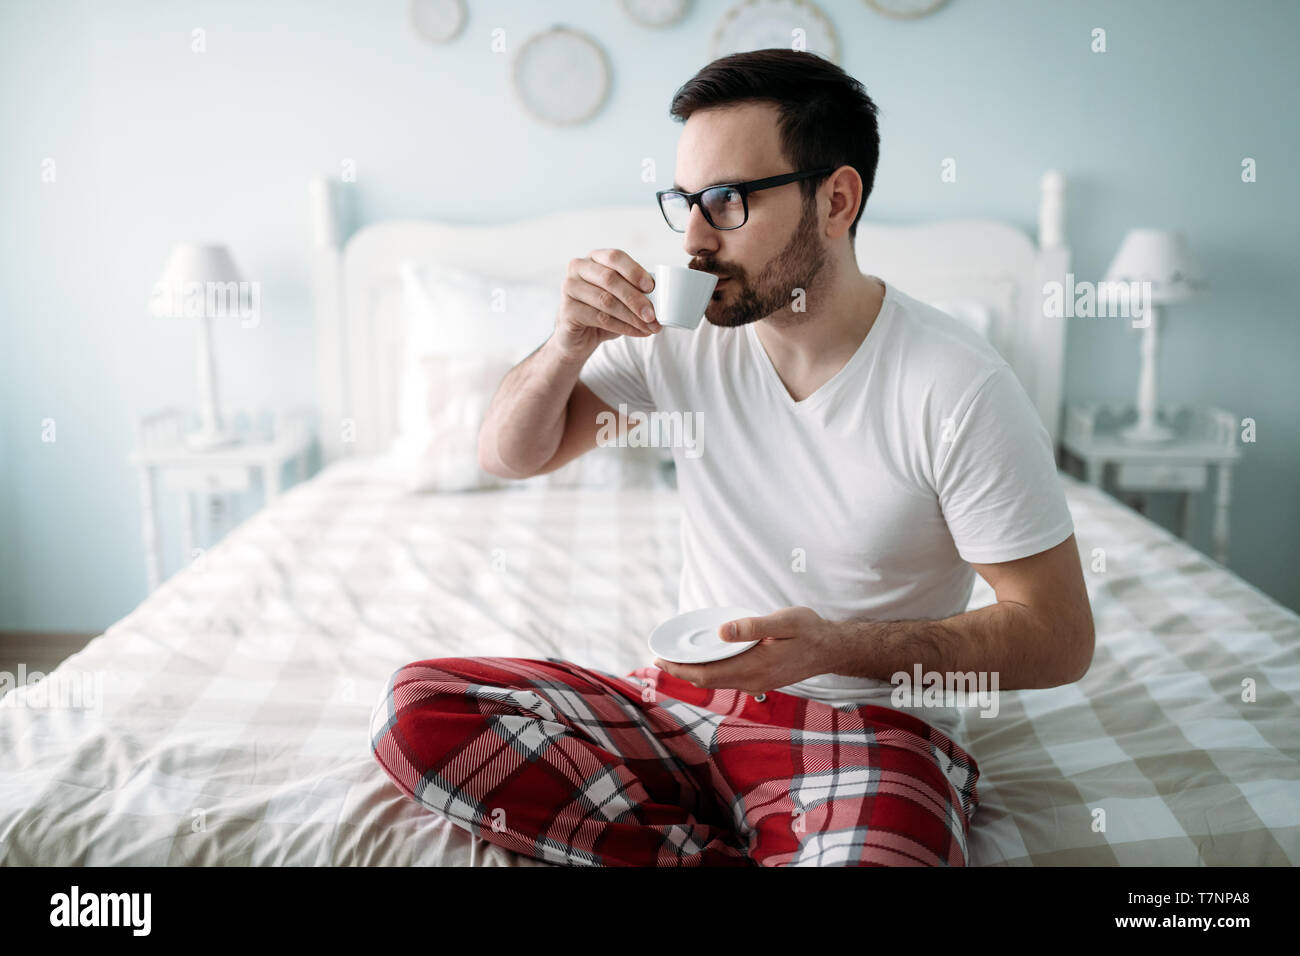 Portrait of handsome young man drinking coffee Stock Photo